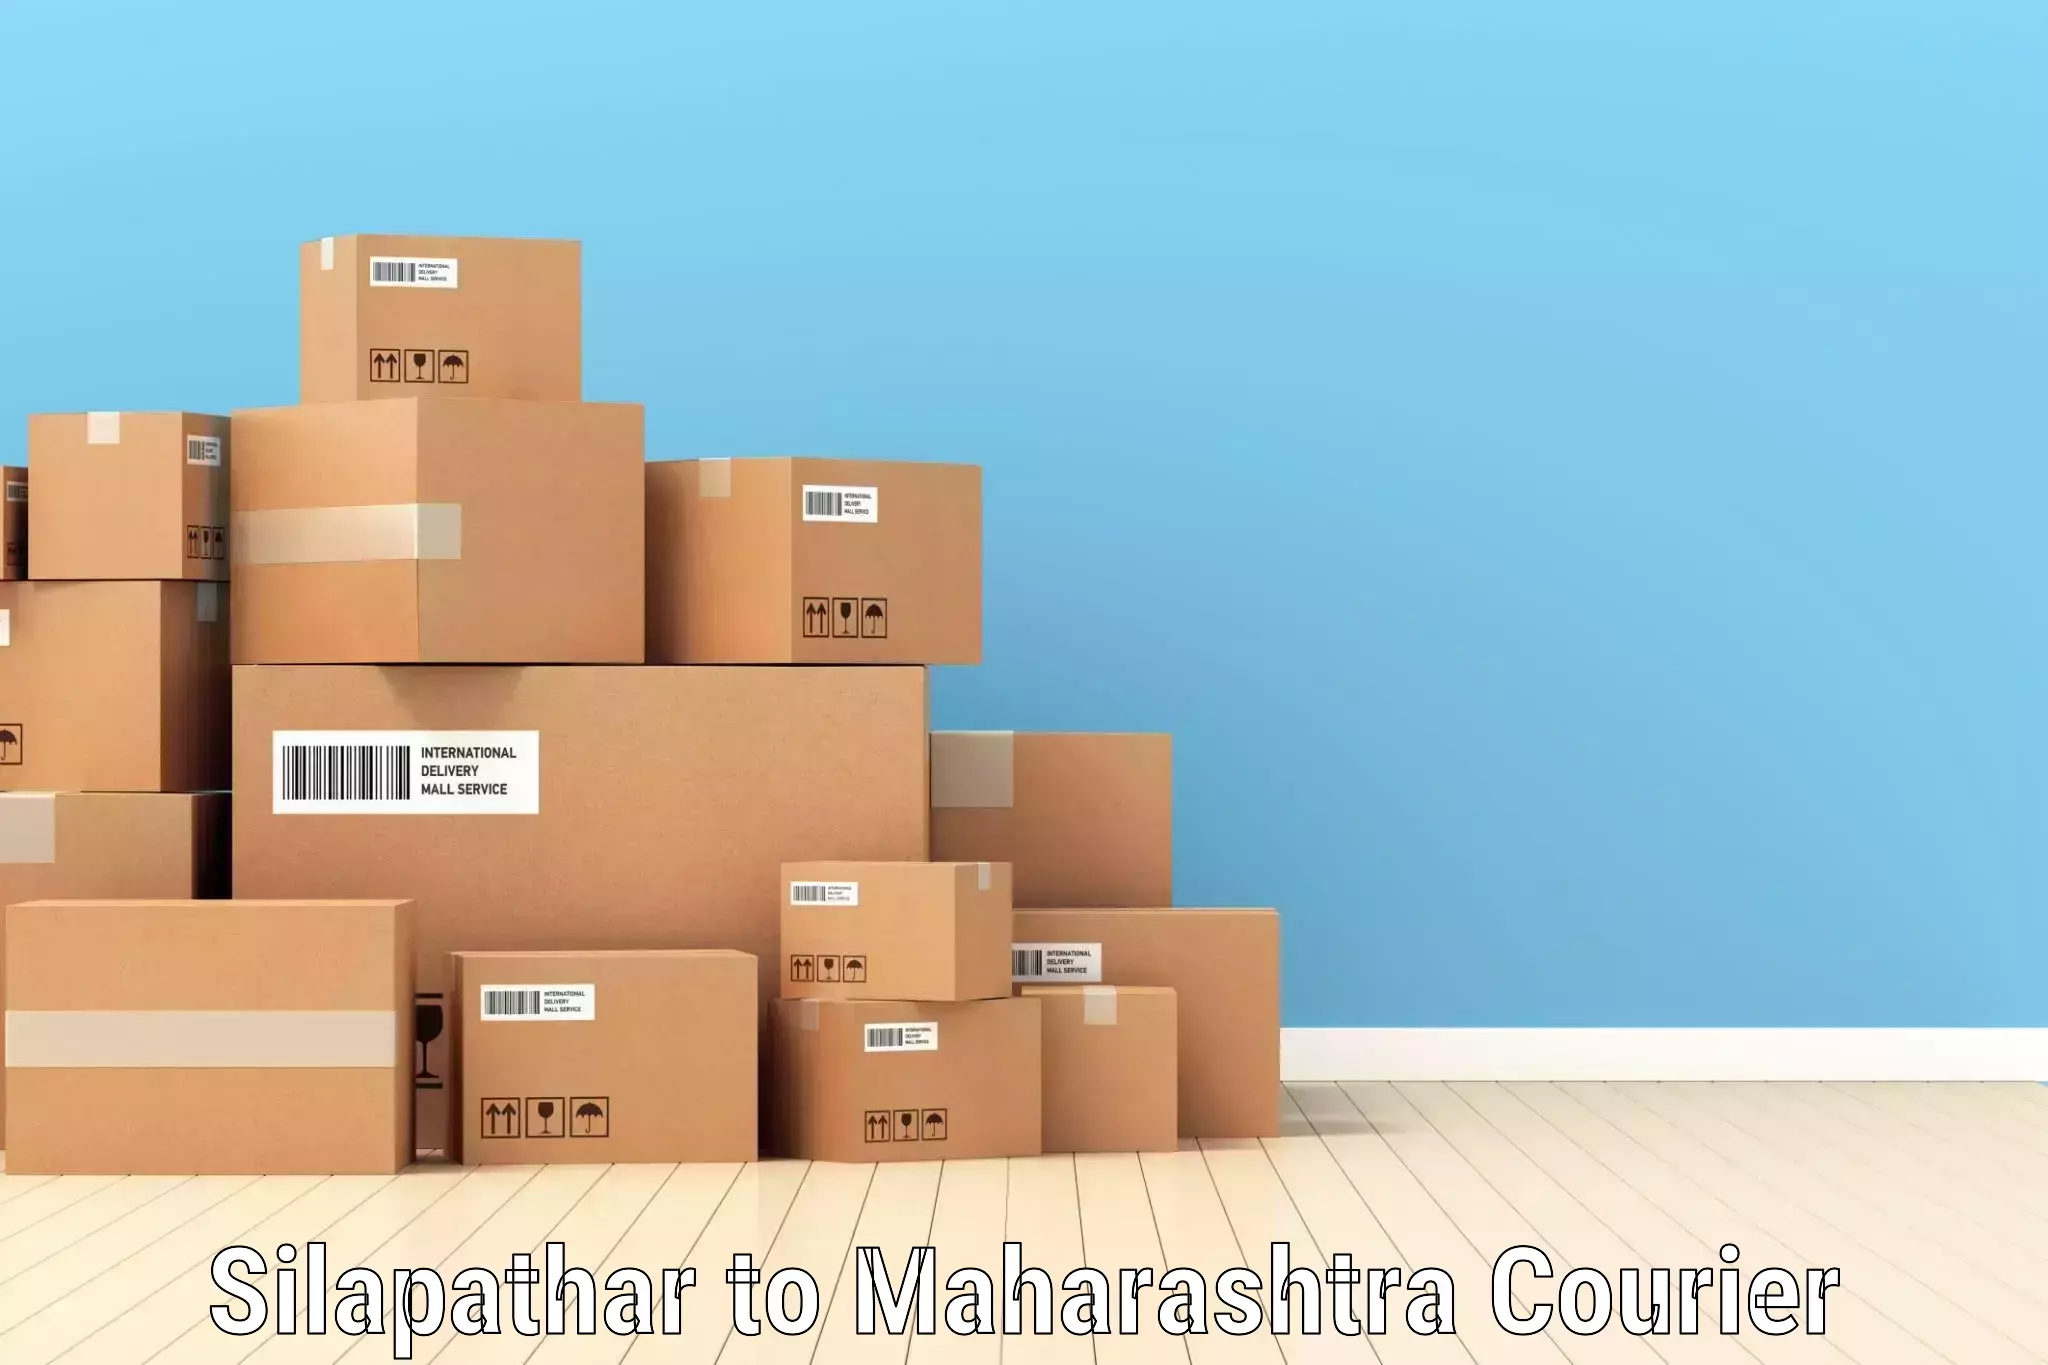 Comprehensive delivery network Silapathar to Jalna